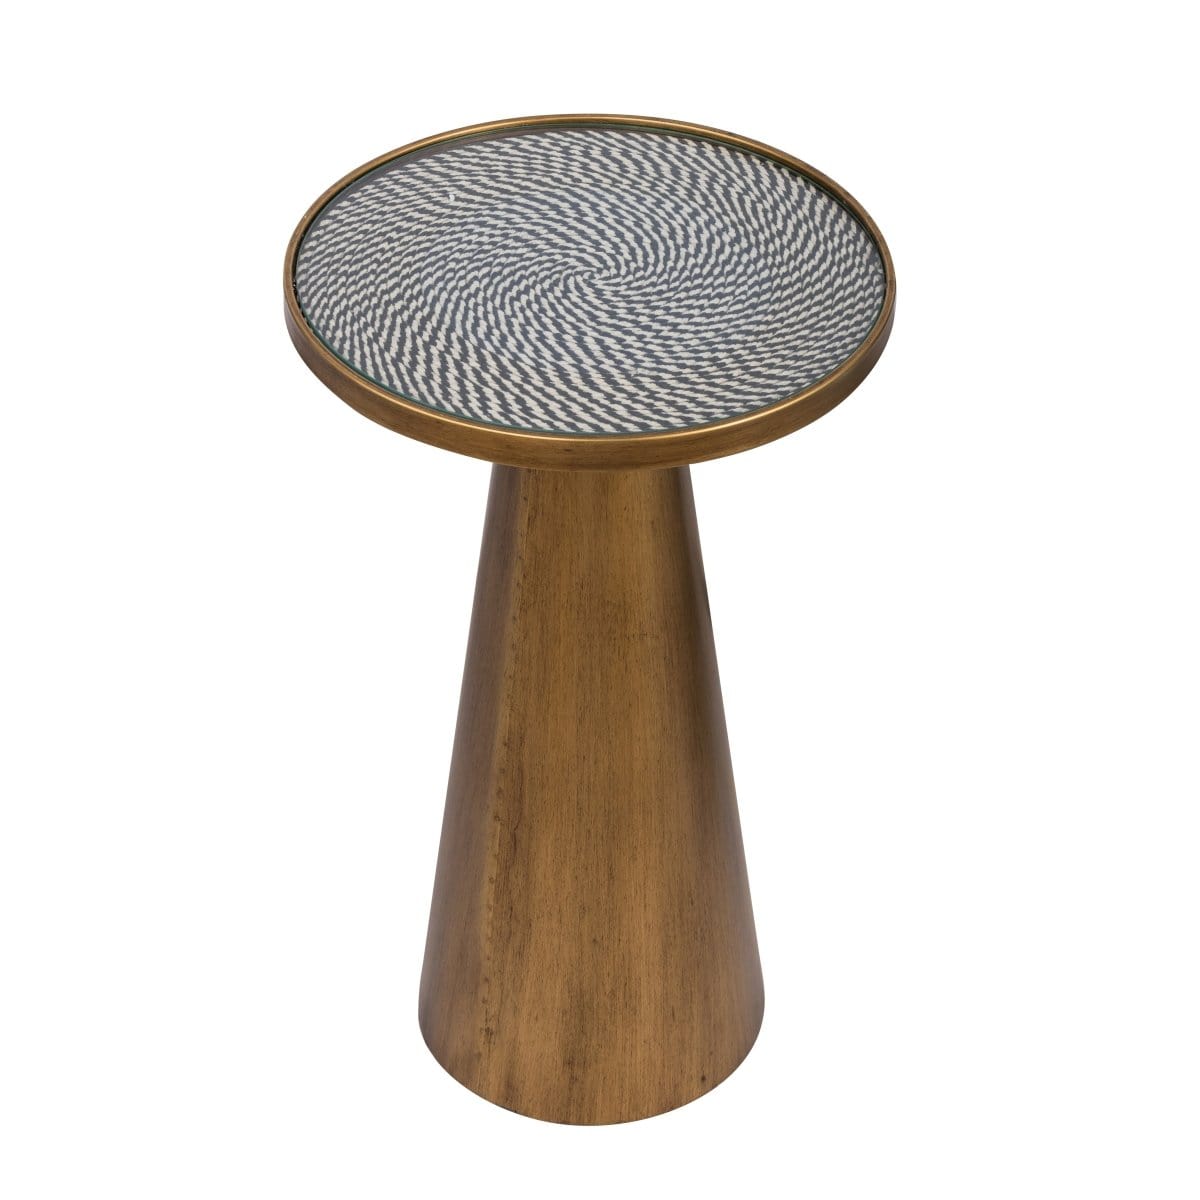 Modern Chic Round Side Table AB-44133 picket and rail